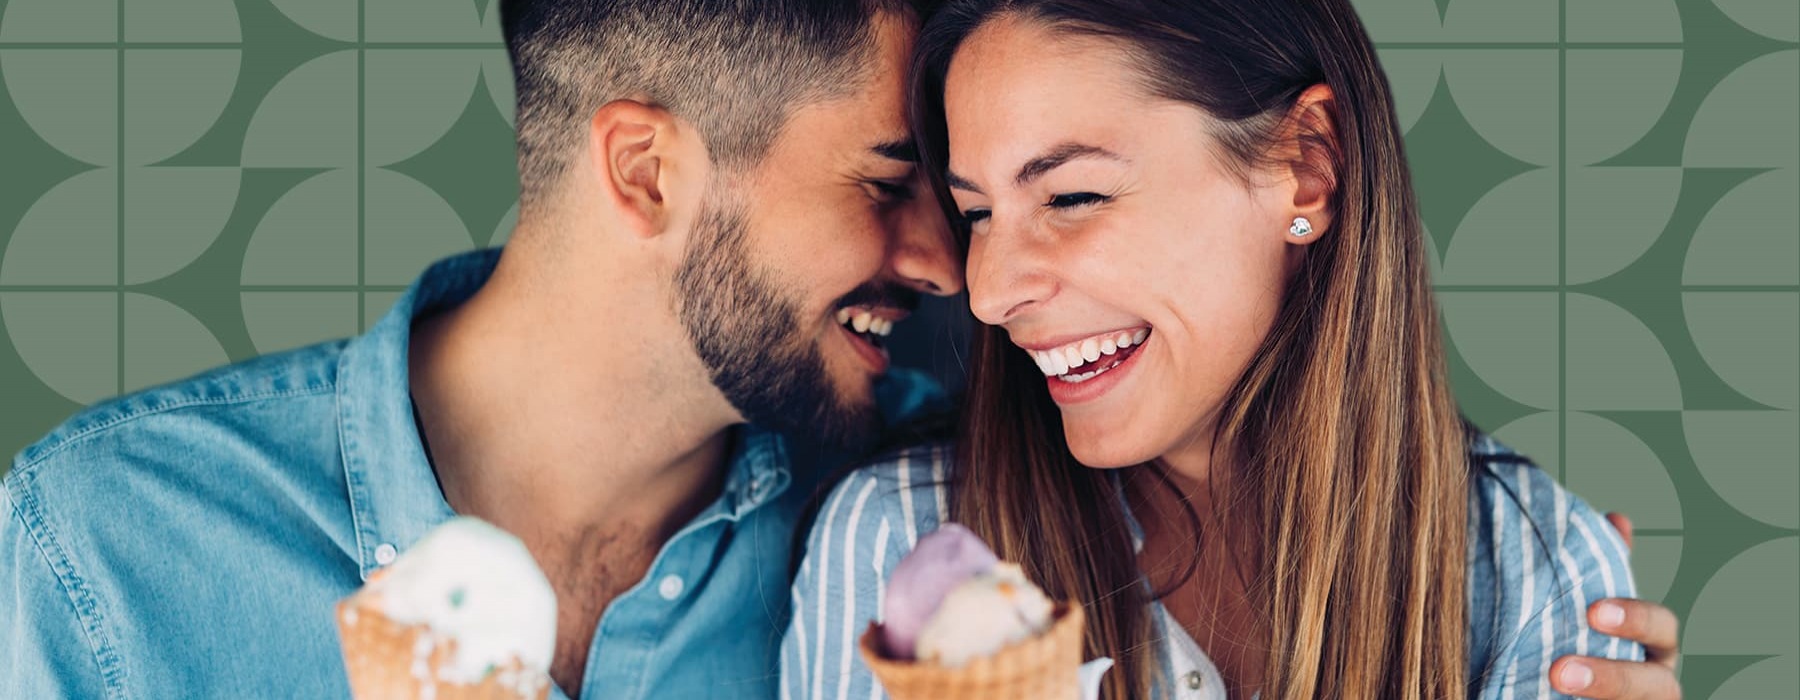 lifestyle image of a couple laughing while holding ice cream cones